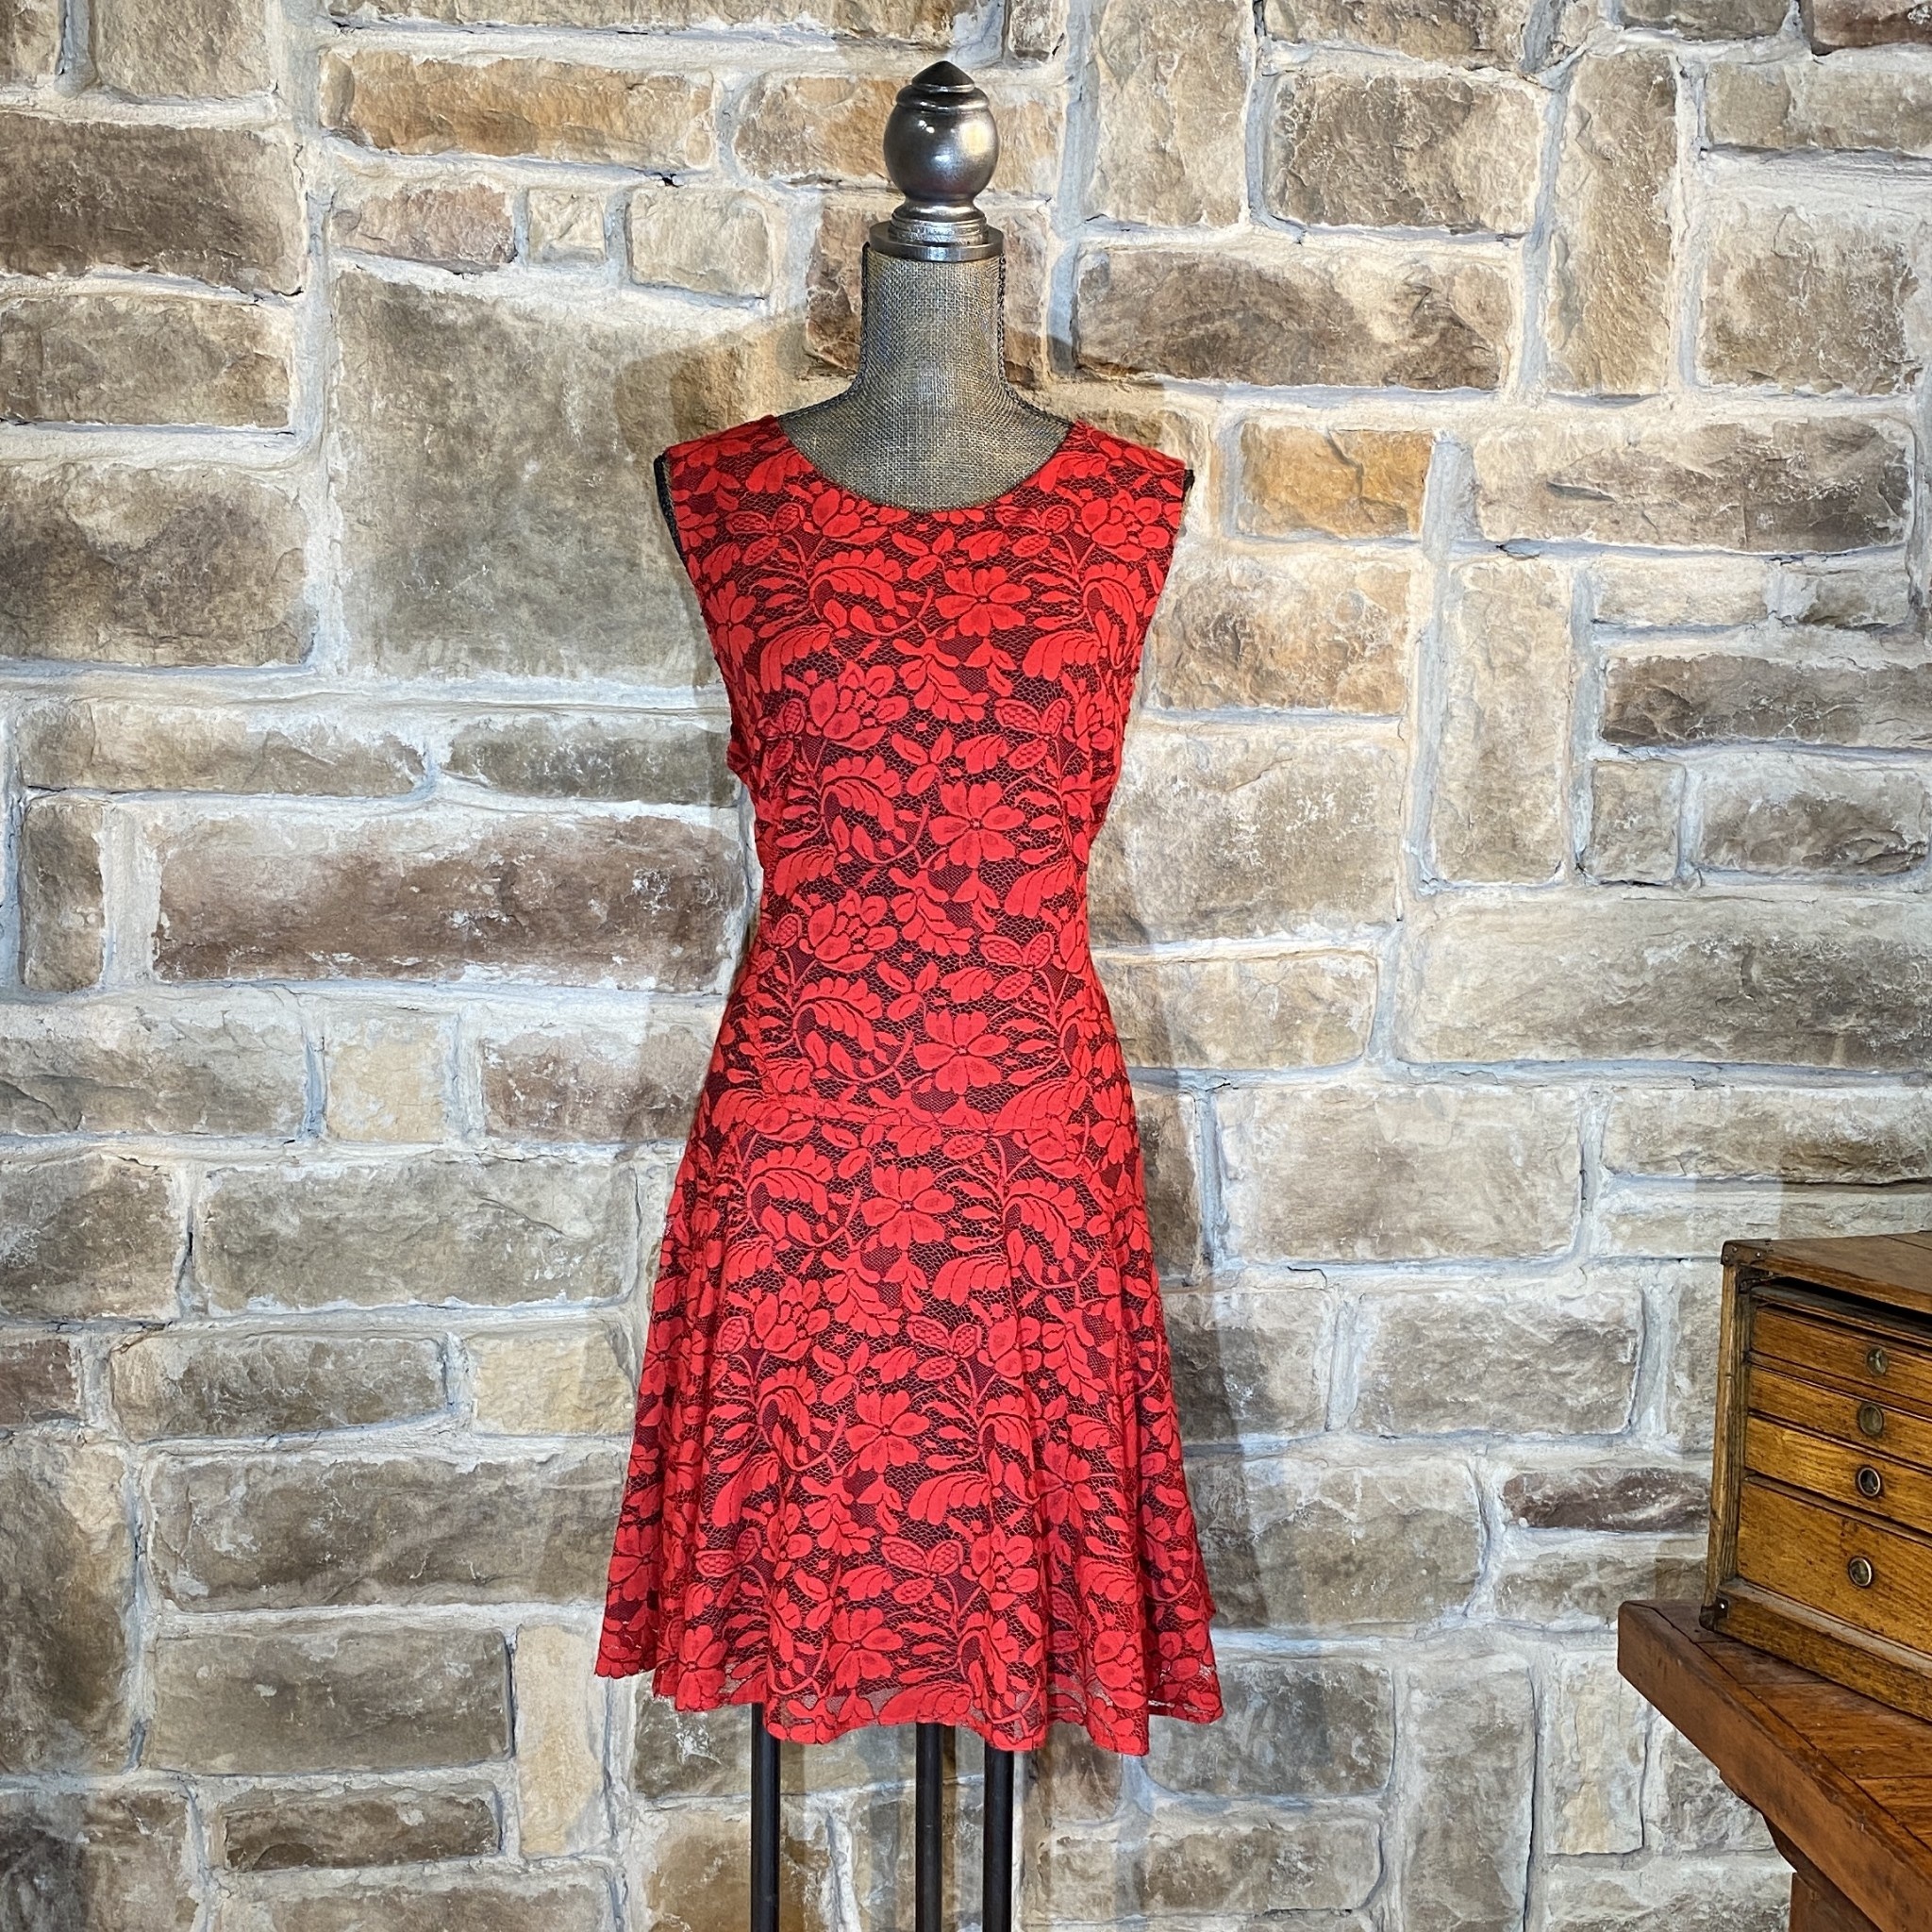 tommy hilfiger red and black dress